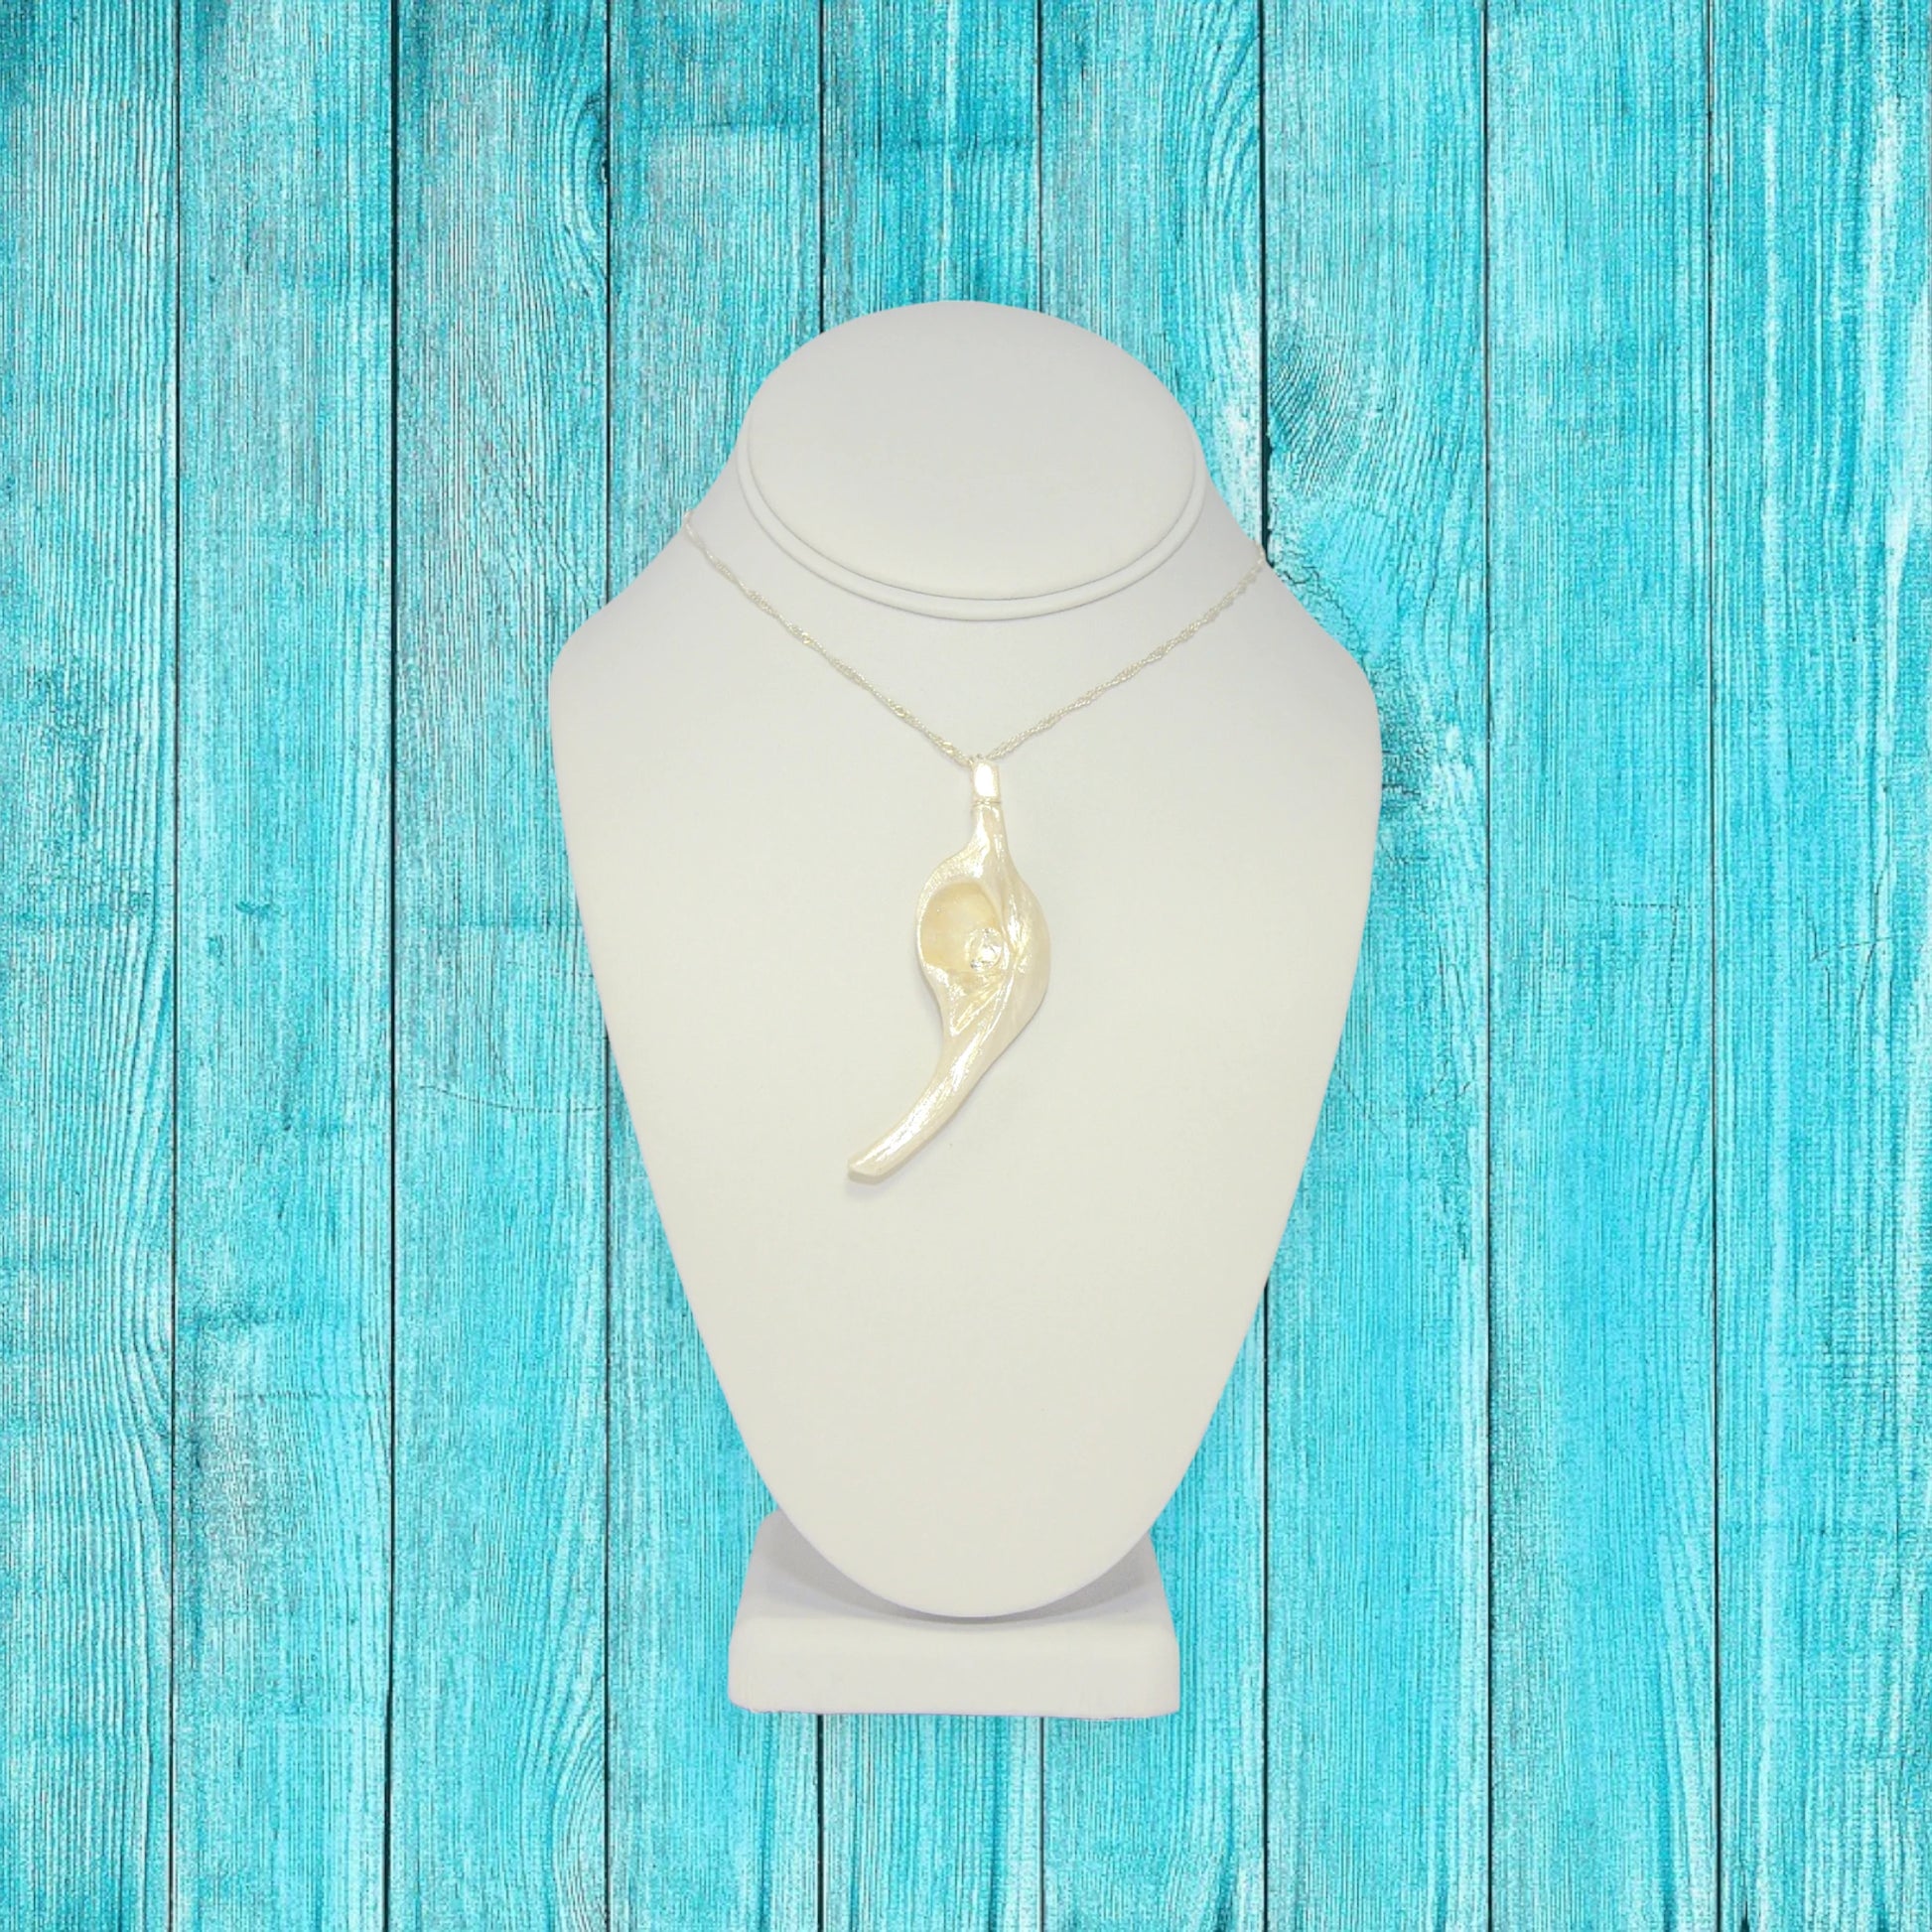 Diamond Star natural seashell pendant with eight mm faceted herkimer diamond. The pendant is hanging on a chain that is on a white necklace displayer. The background is turquoise blue fence boards.